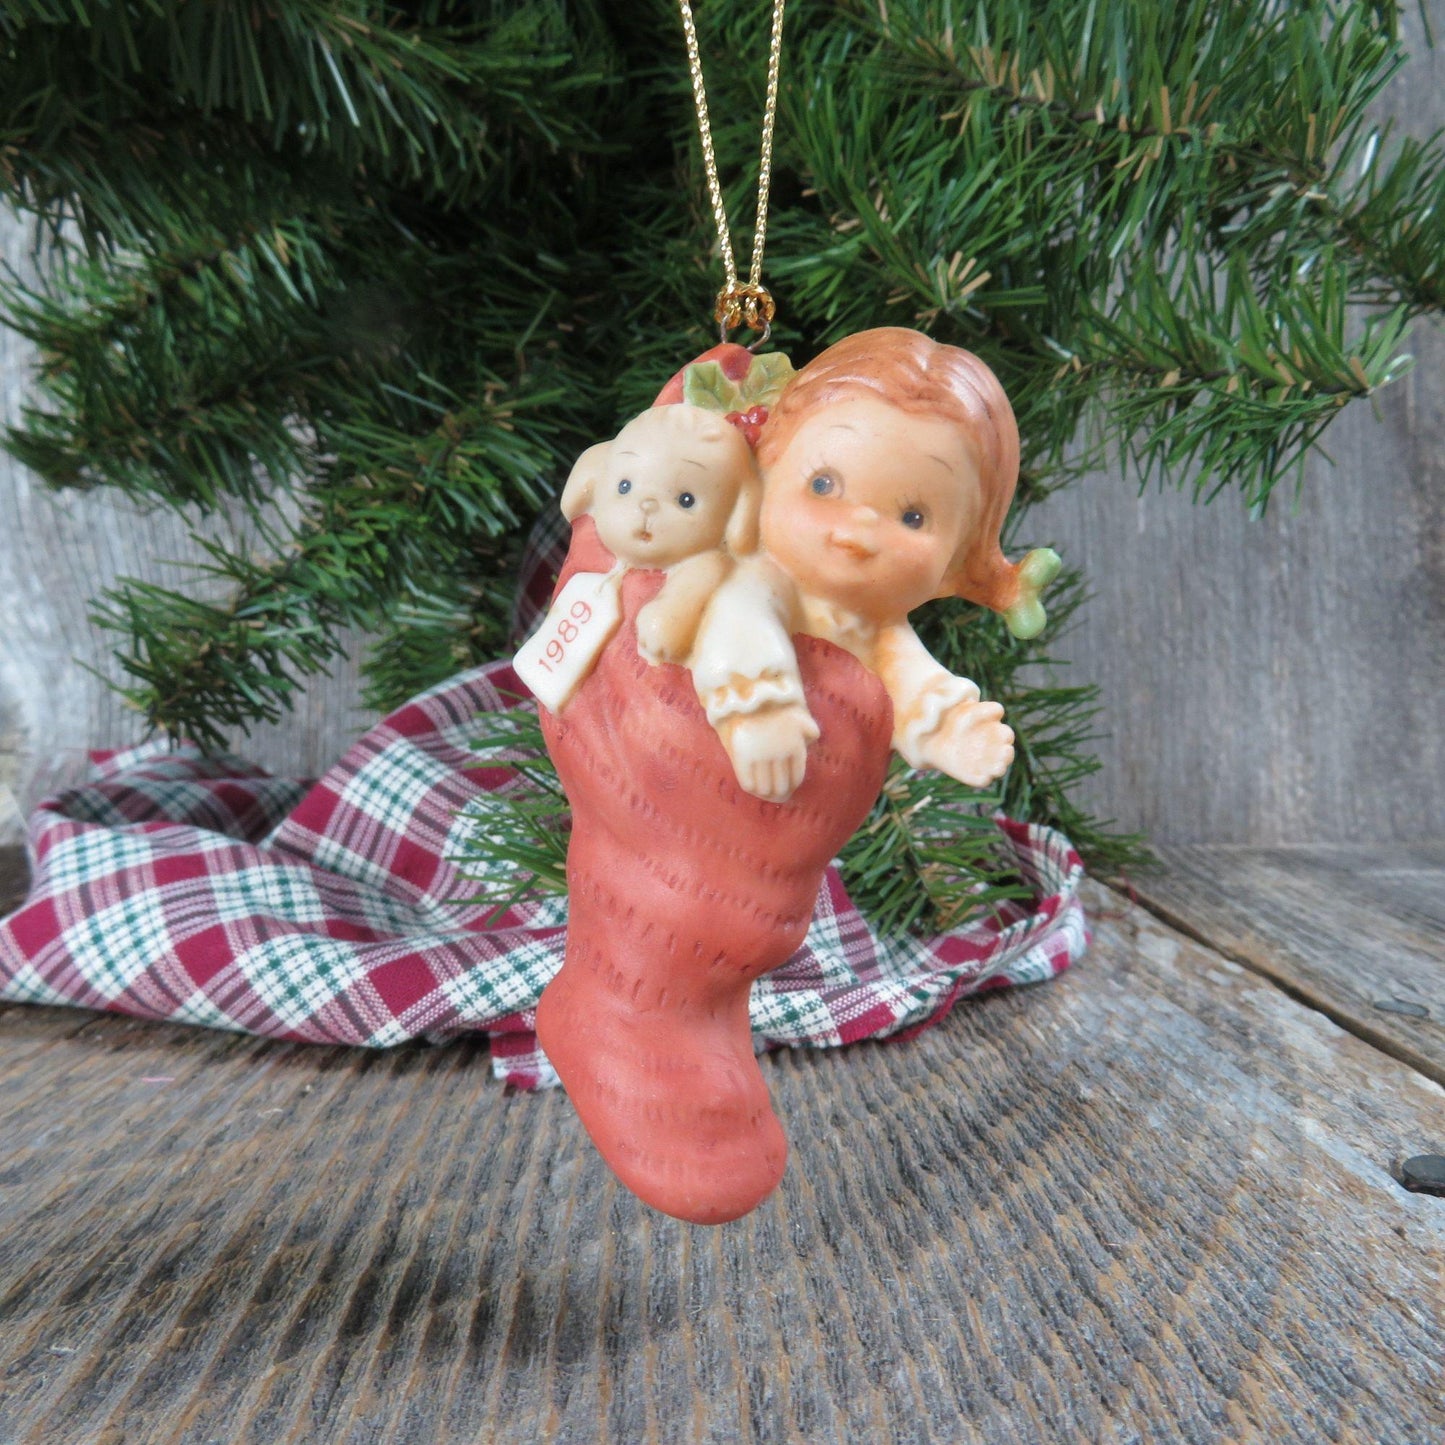 Vintage Doll and Lamb in Stocking Ornament A Surprise for Santa Little Girl Memories of Yesterday by Enesco 1989